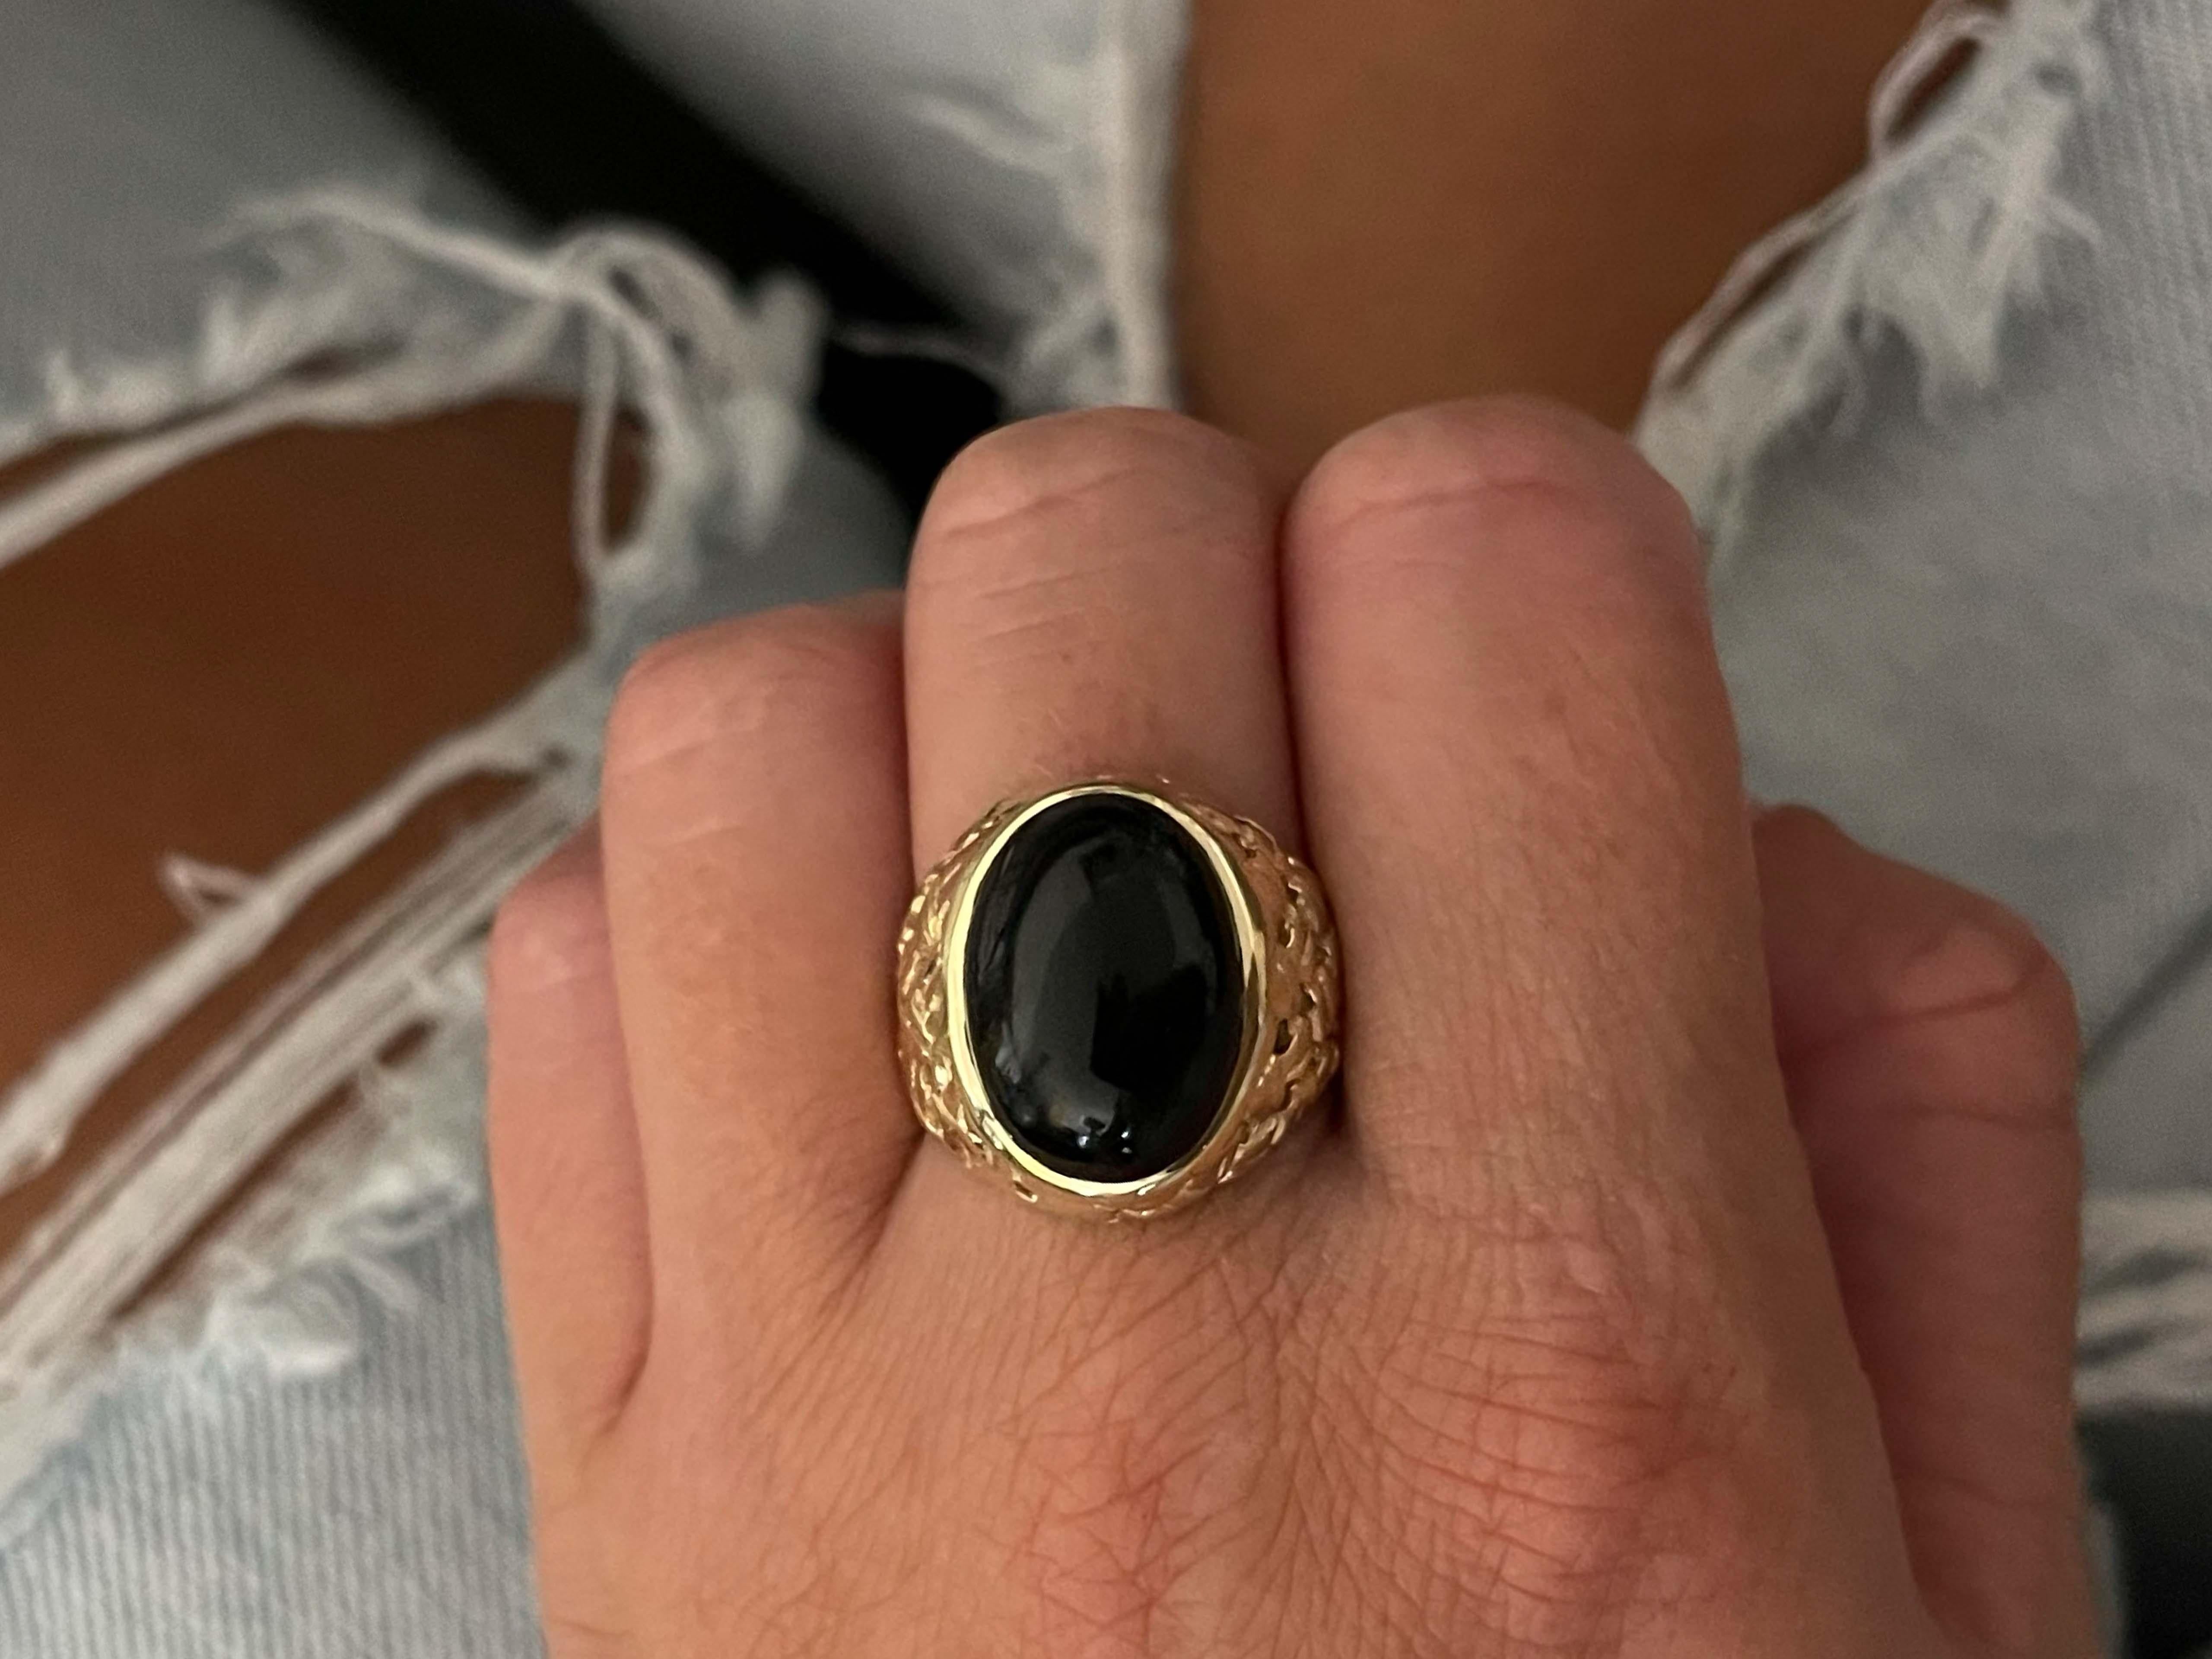 Ring Specifications:

Metal: 14k Yellow Gold

Total Weight: 11.8 Grams

Onyx Measurements: 16.5 mm x 13.2 mm x 5.9 mm 

Onyx Carat Weight: ~9.18 carats

Ring Size: 9 (resizable)

Stamped: 